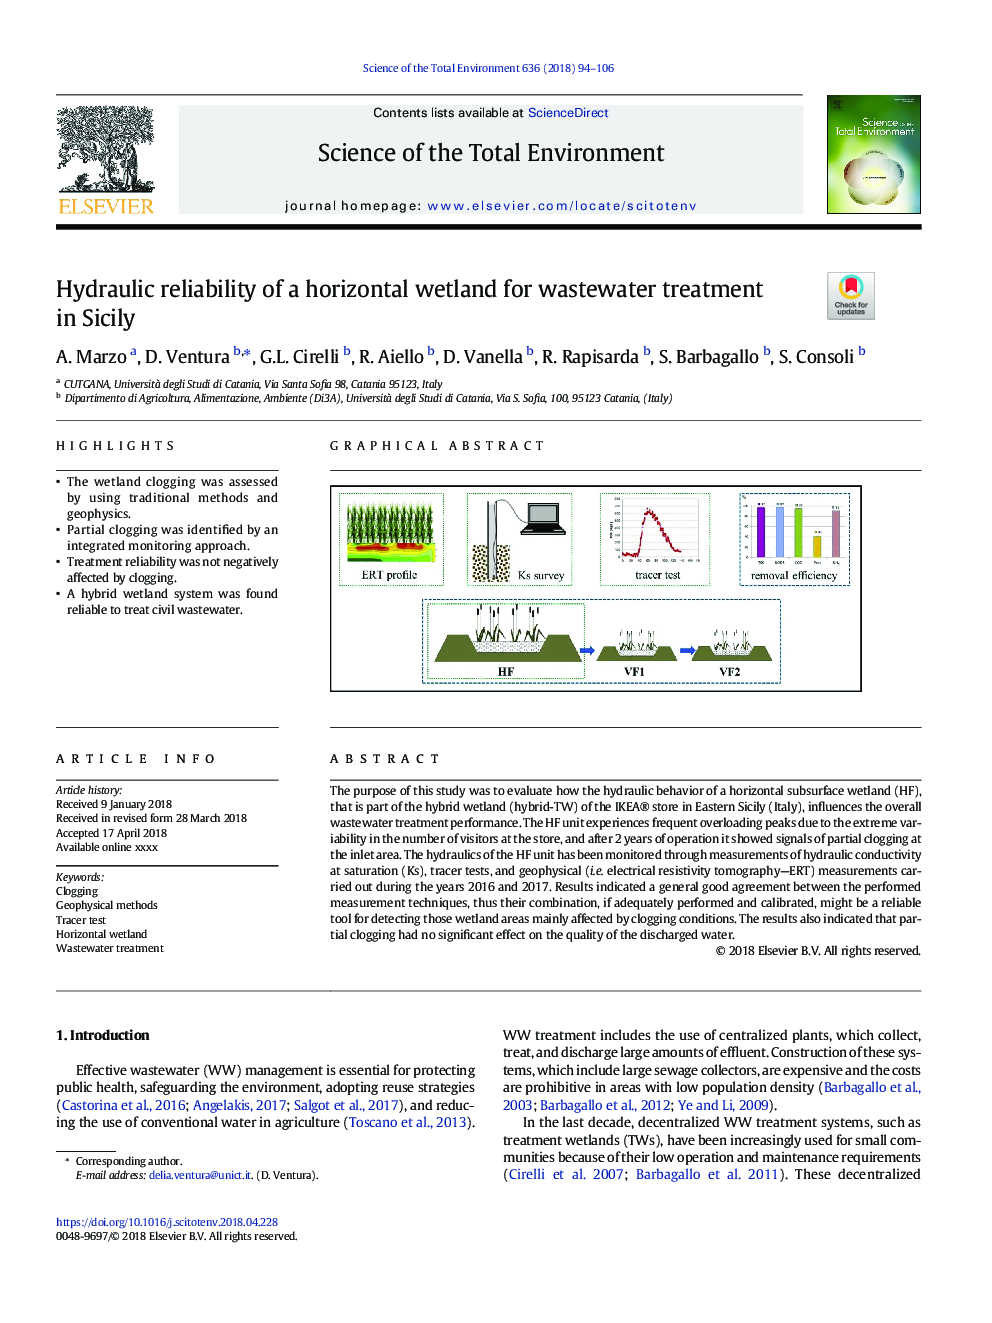 Hydraulic reliability of a horizontal wetland for wastewater treatment in Sicily